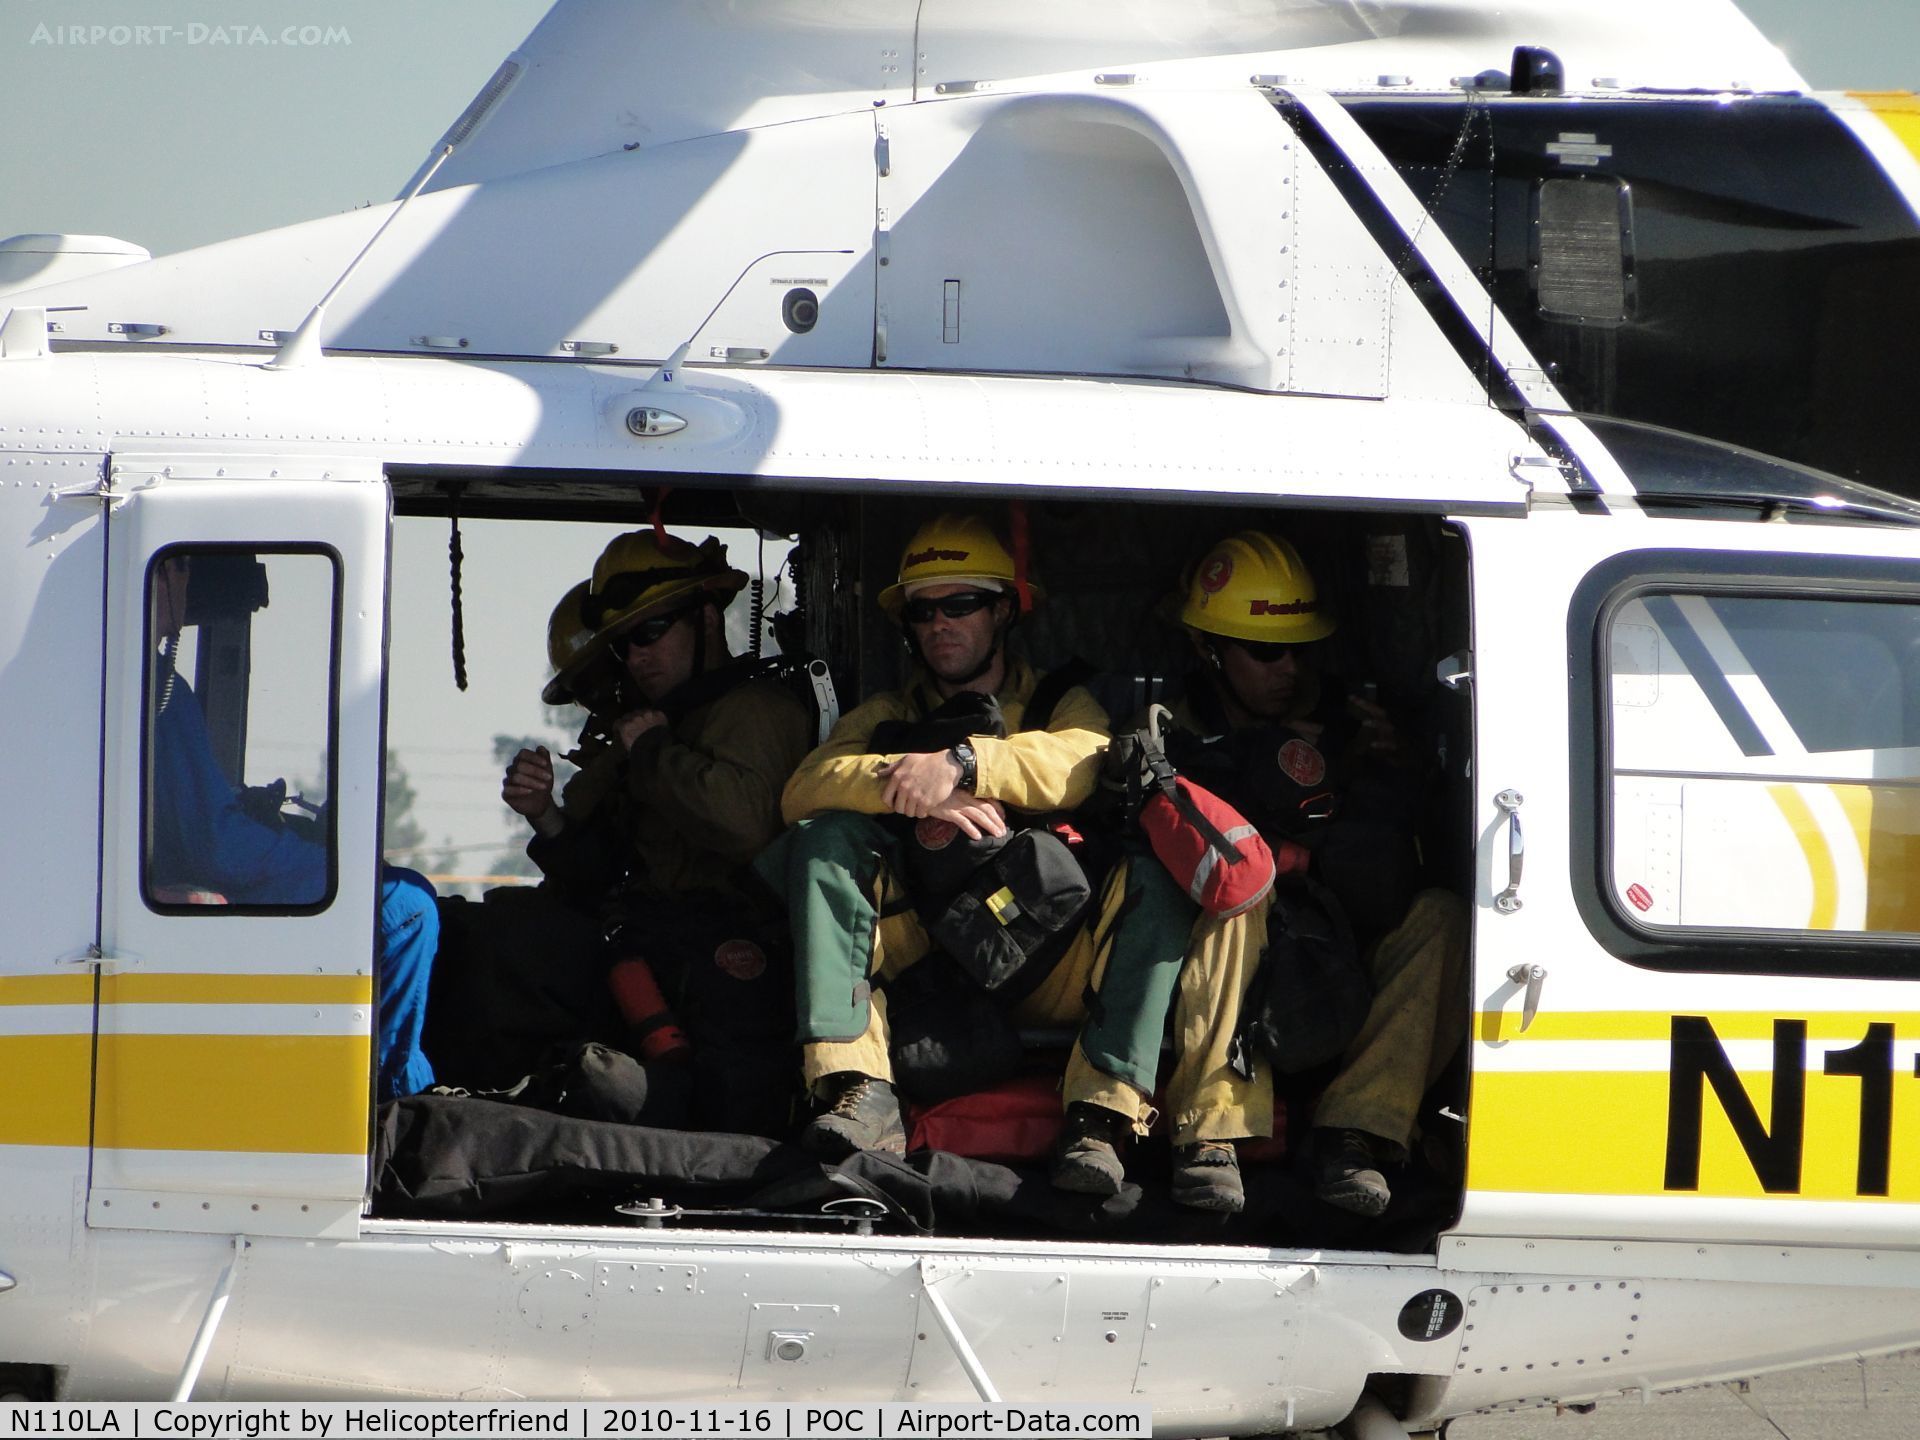 N110LA, 2005 Bell 412EP C/N 36392, Fire fighters on board and recieving instructions from helicopter crew member